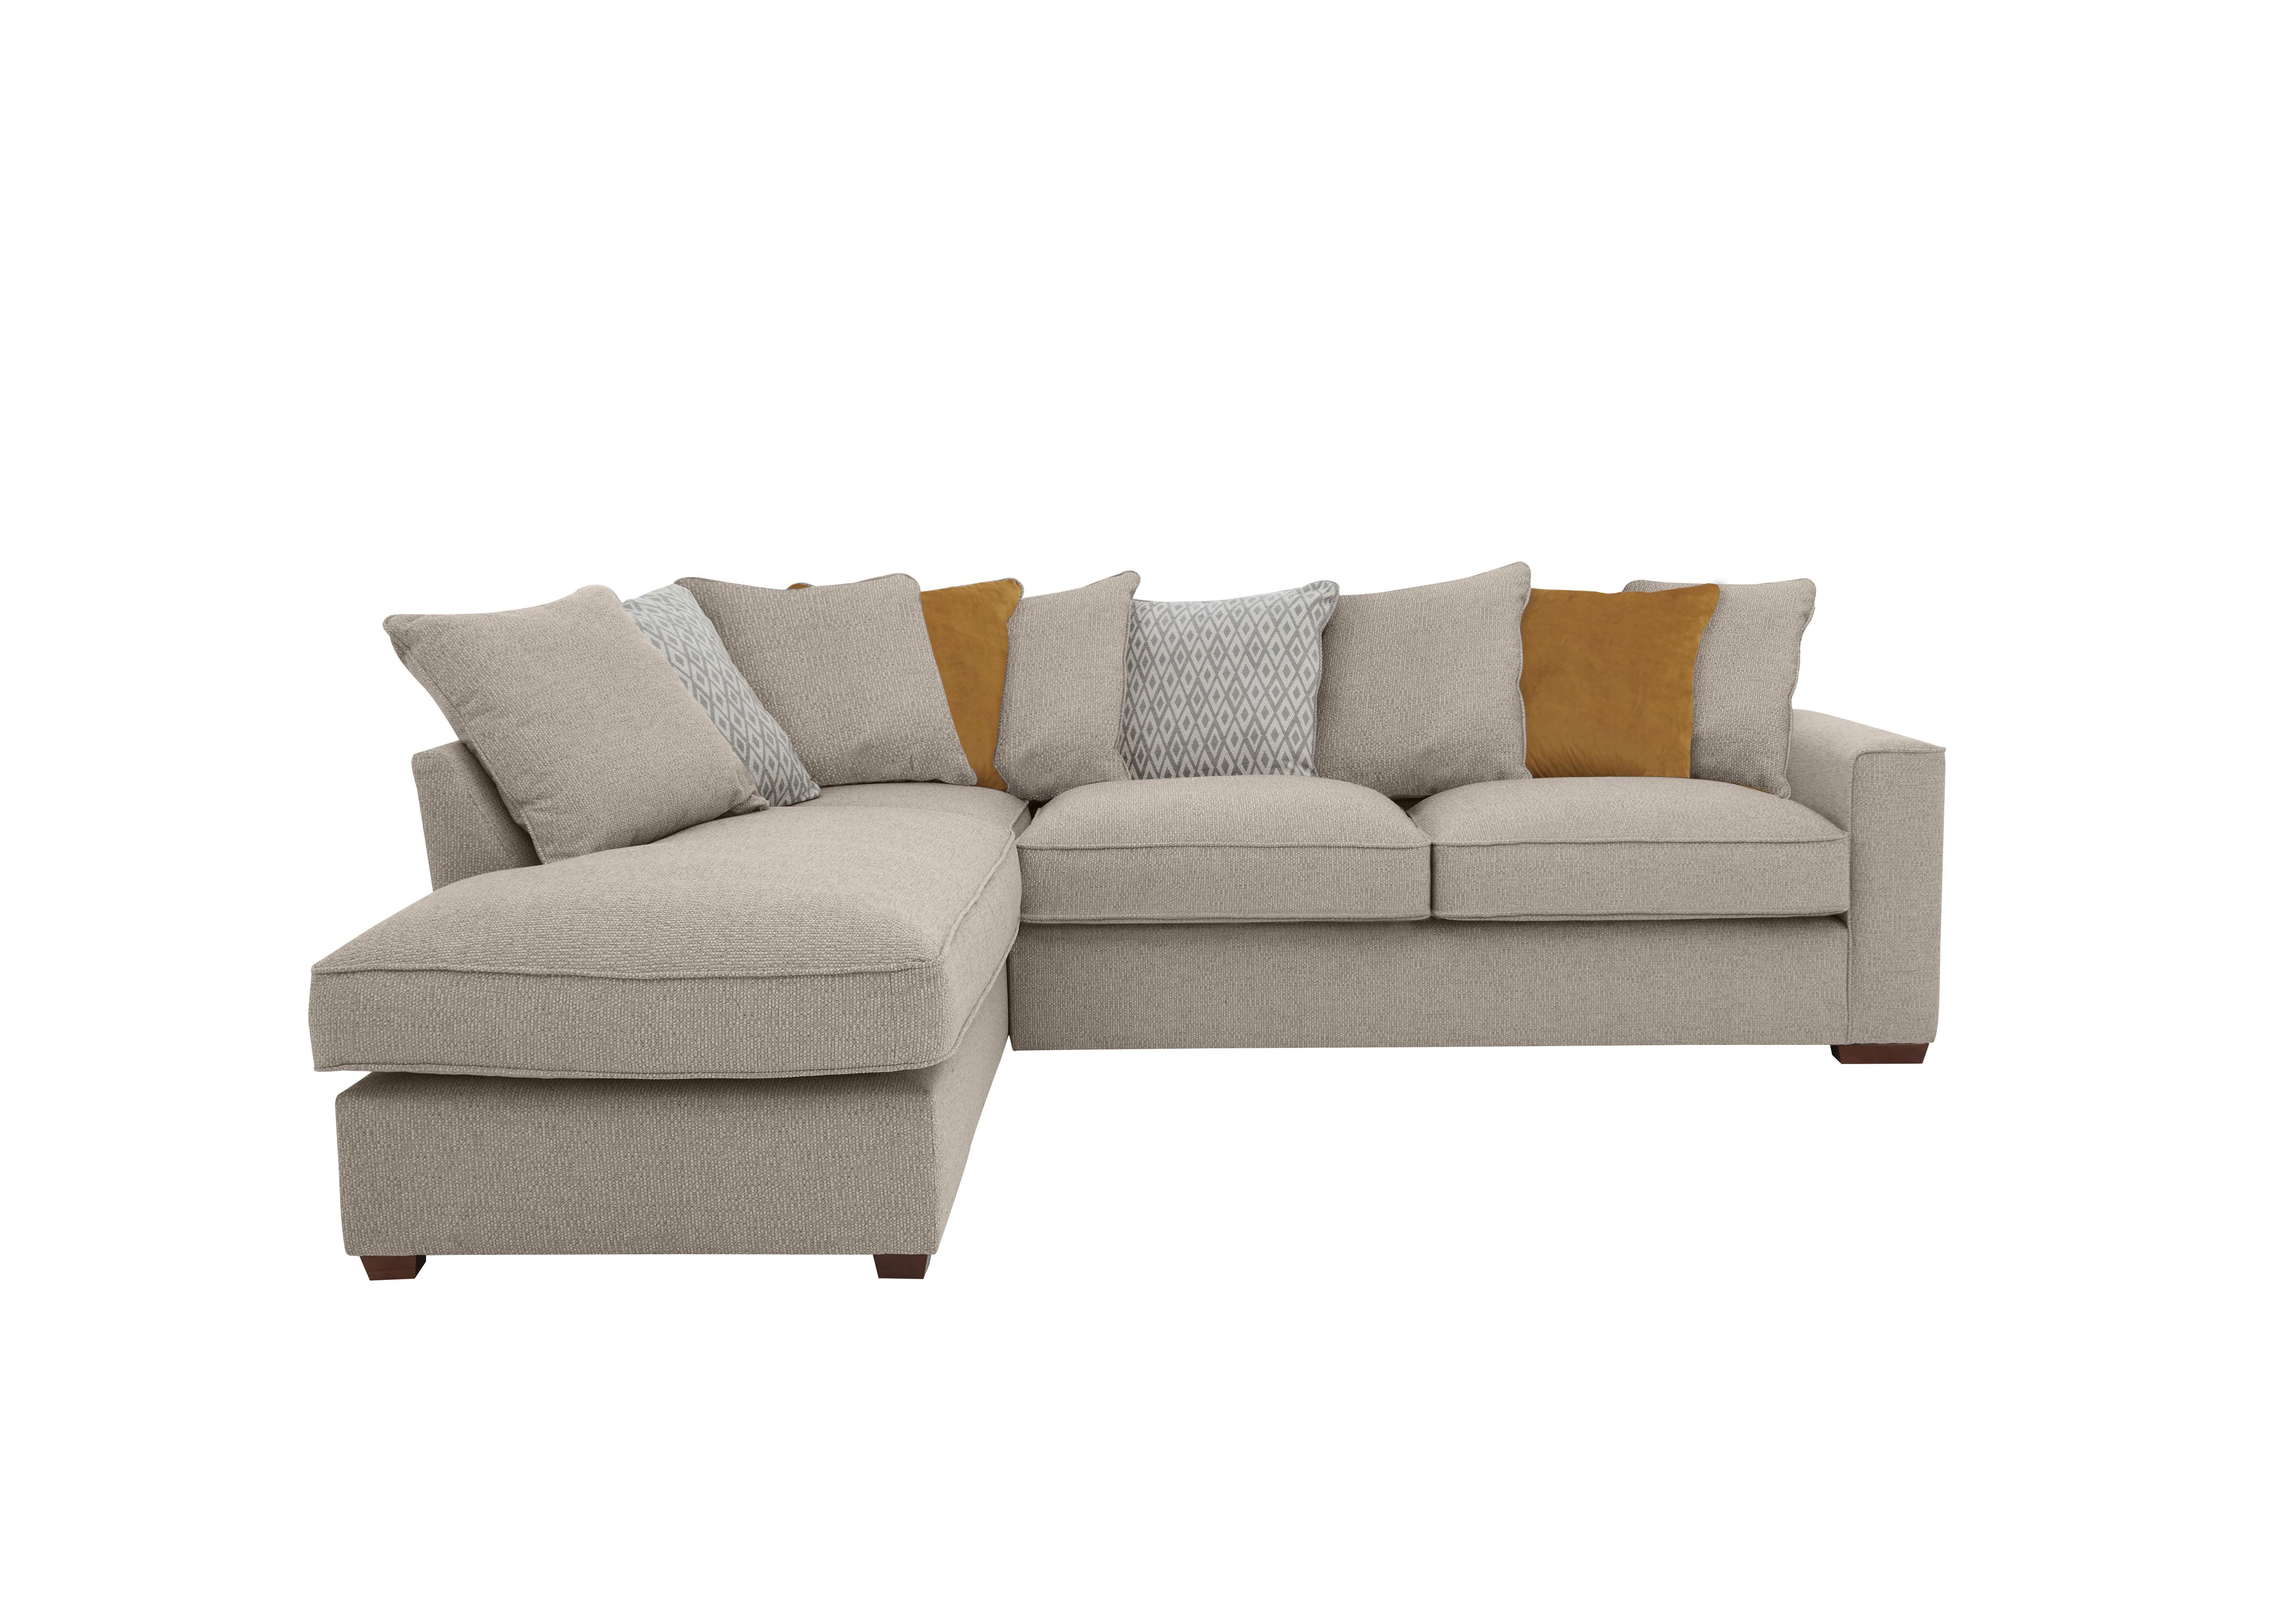 Cory Fabric Corner Chaise Scatter Back Sofa Bed in Dallas Natural Mustard Pack on Furniture Village